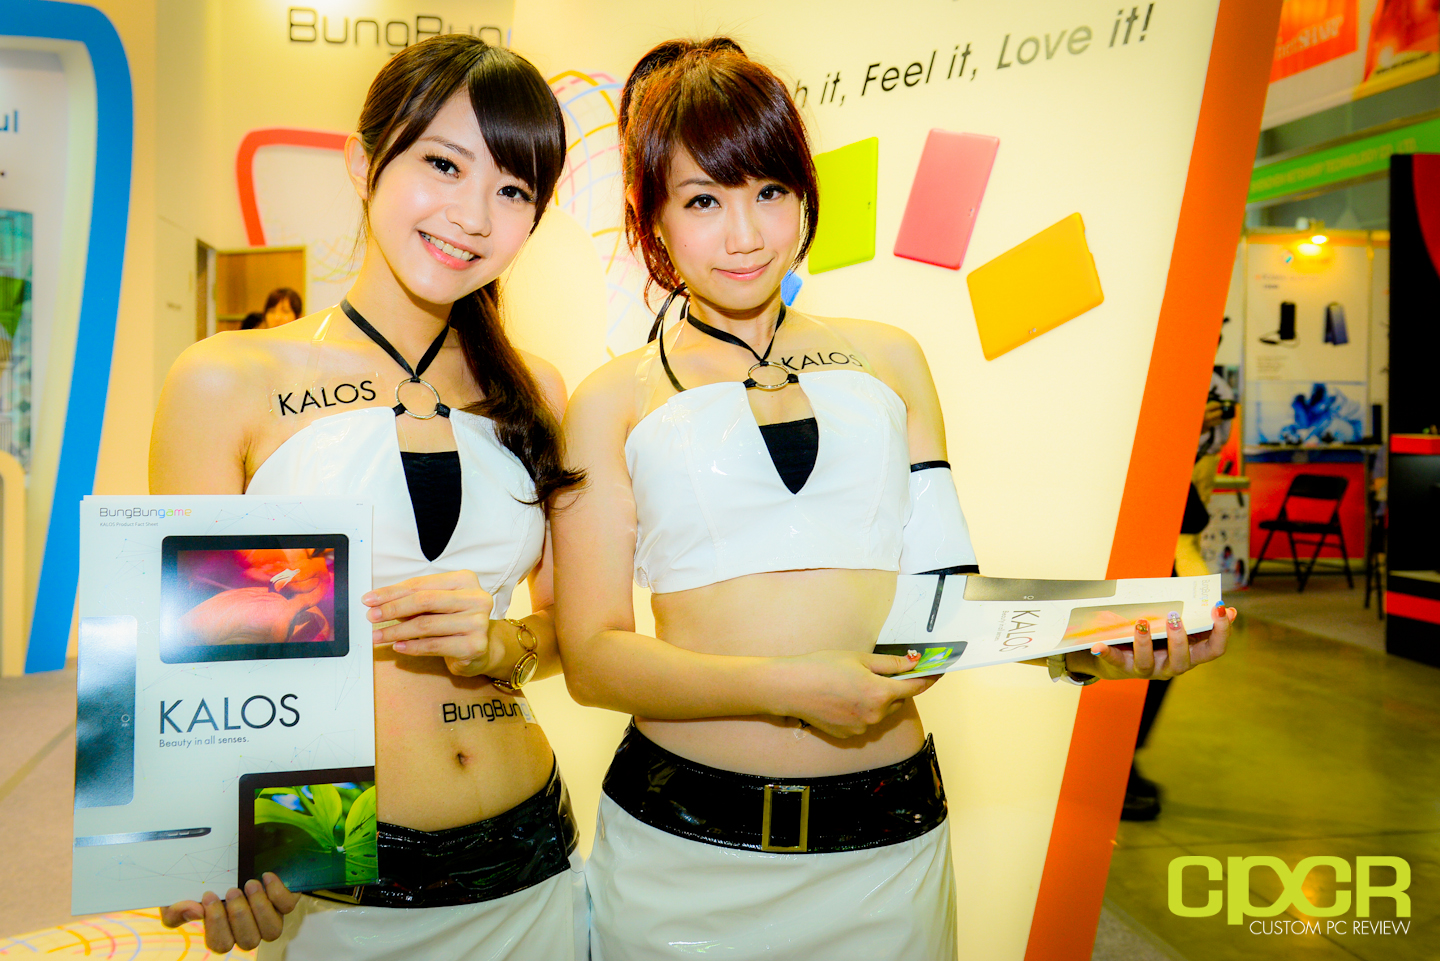 Computex Booth Babes of 2013